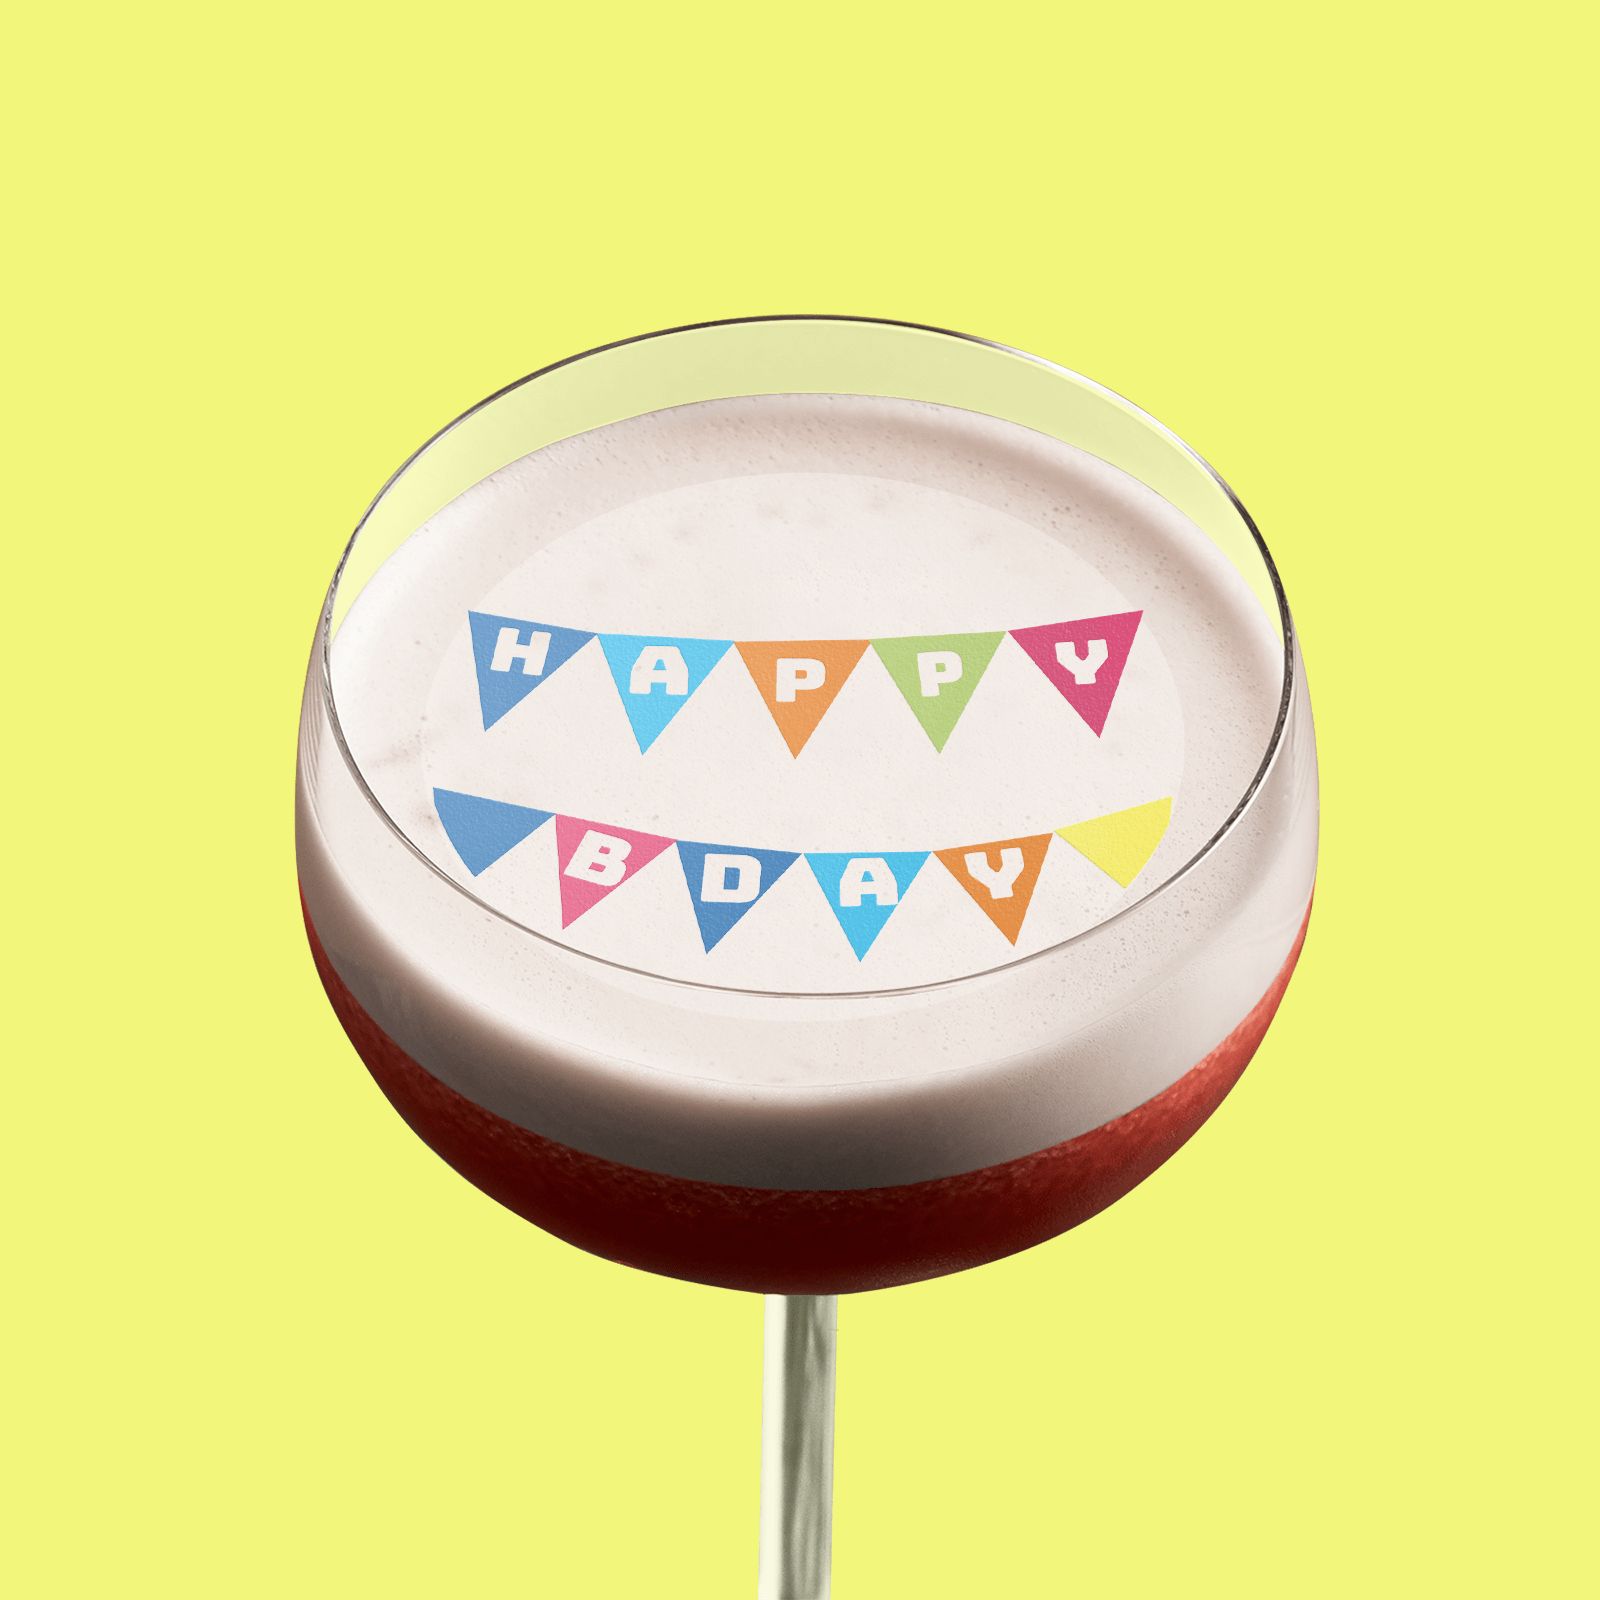 Happy Bday Drink Topper - Edible Cocktail Toppers